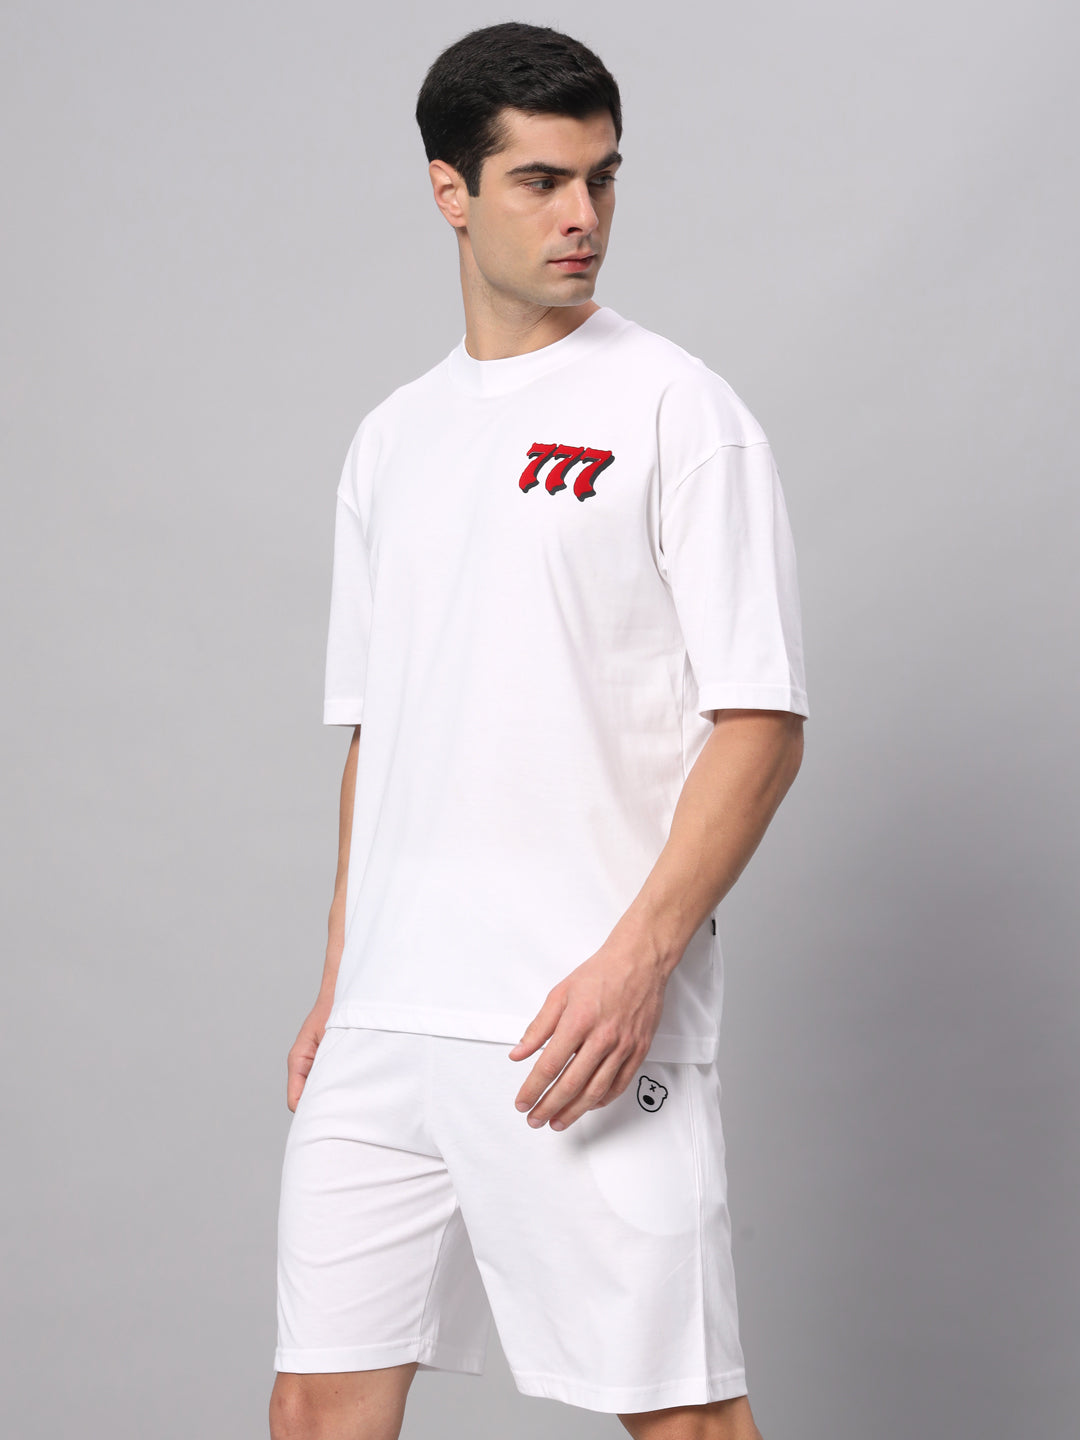 777 T-shirt and Shorts Set - griffel